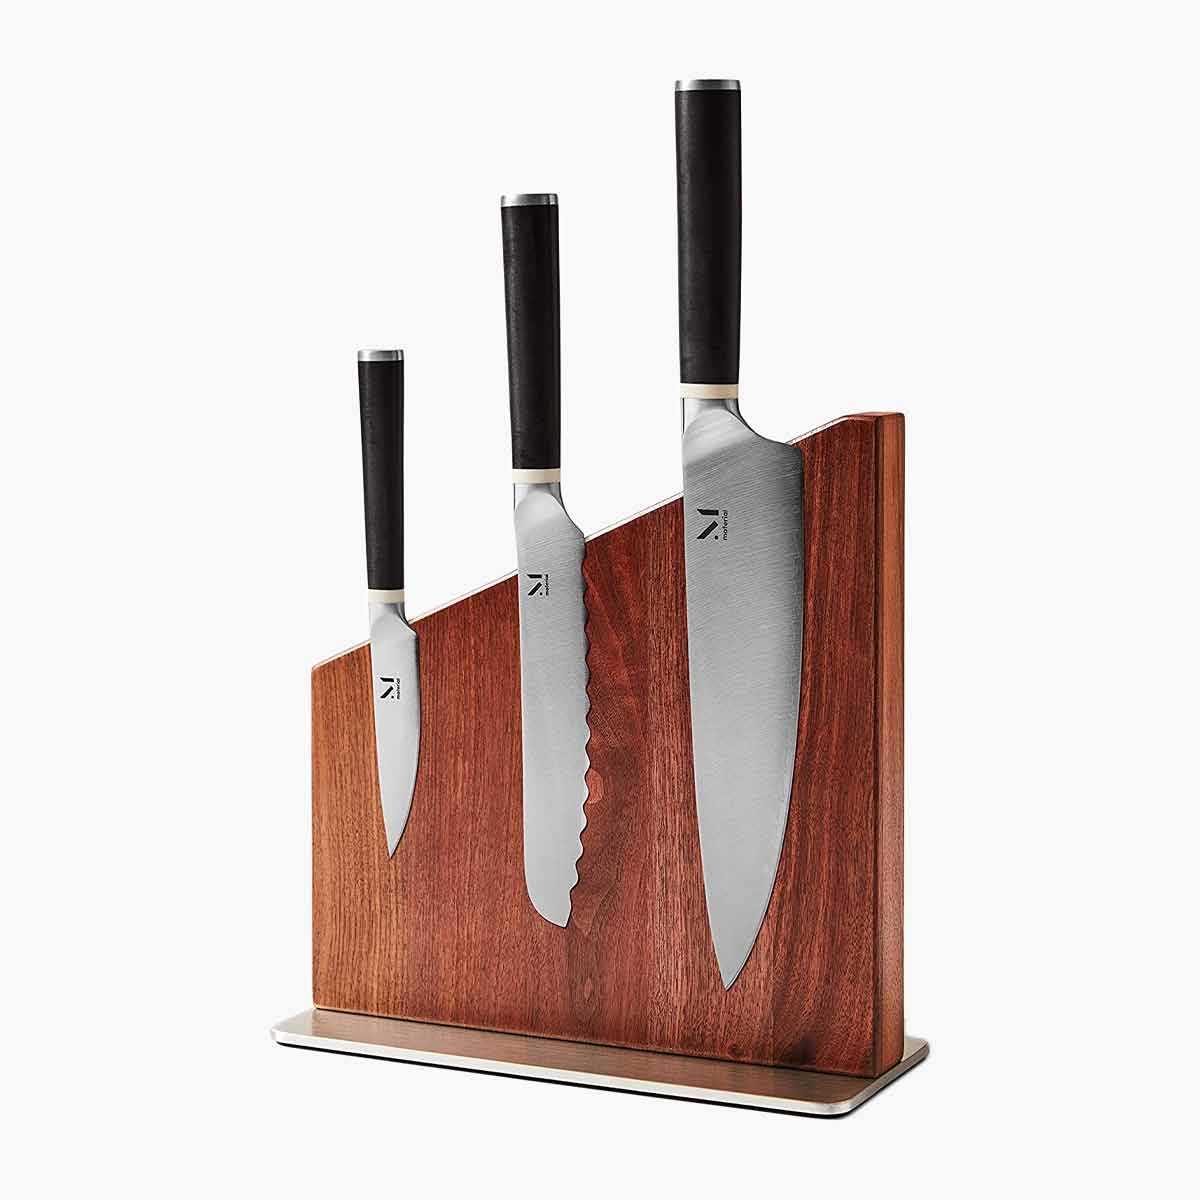 Three knives on a magnetic wooden block, one of Oprah's 12 favorite kitchen gifts for 2021.